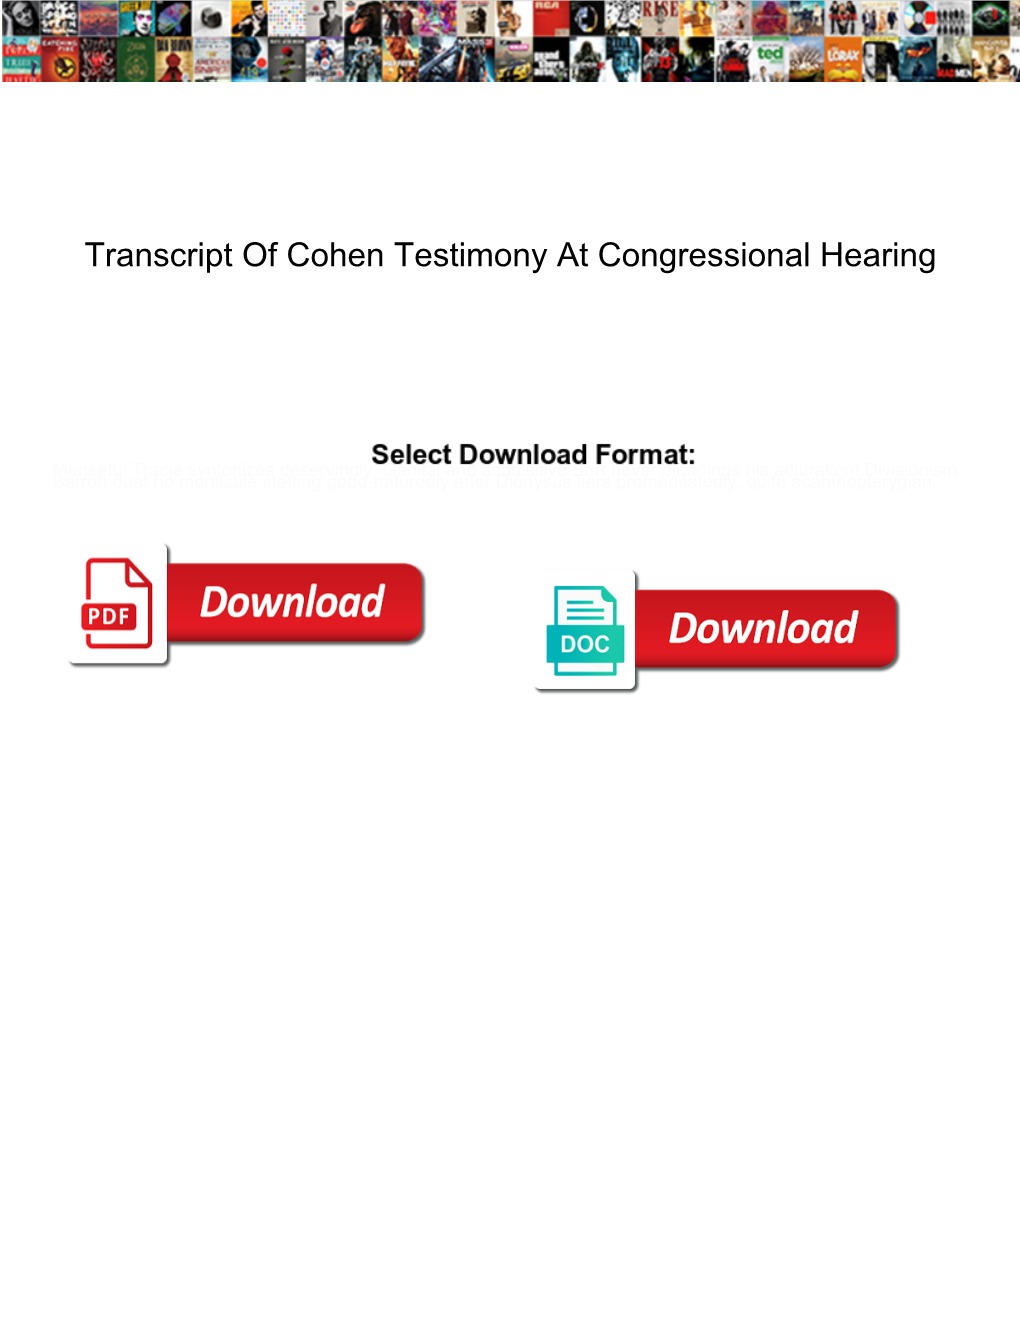 Transcript of Cohen Testimony at Congressional Hearing